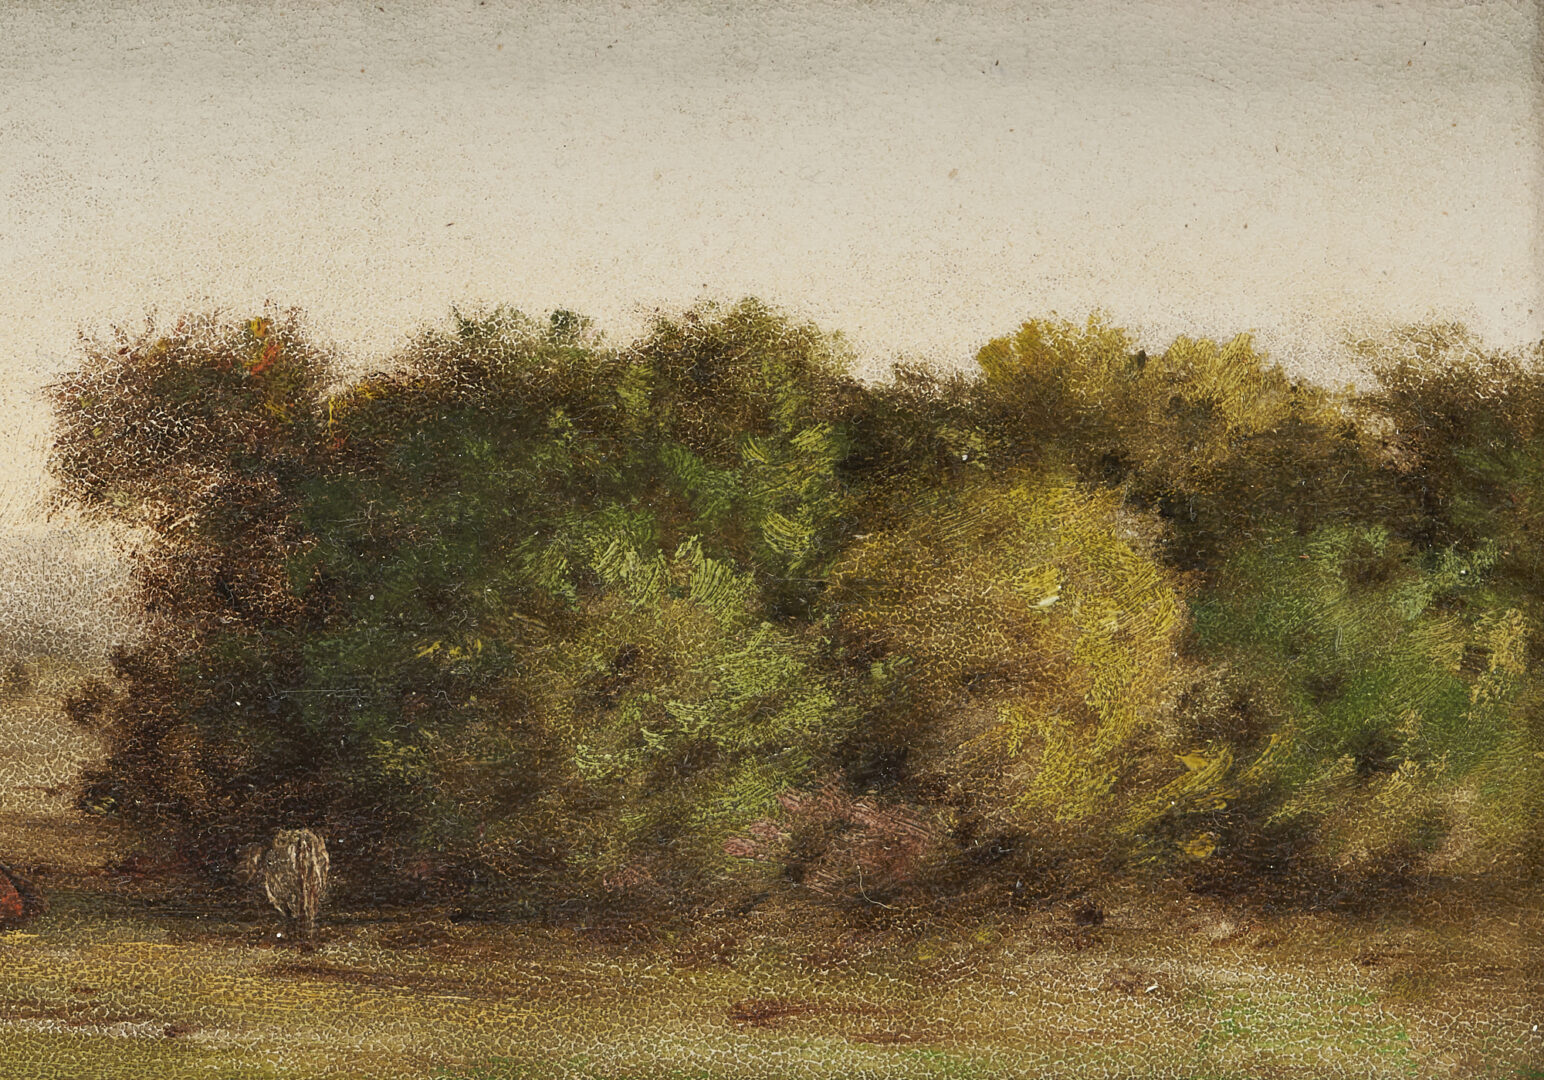 Lot 143: Thomas Campbell O/B Tennessee Landscape with Cows